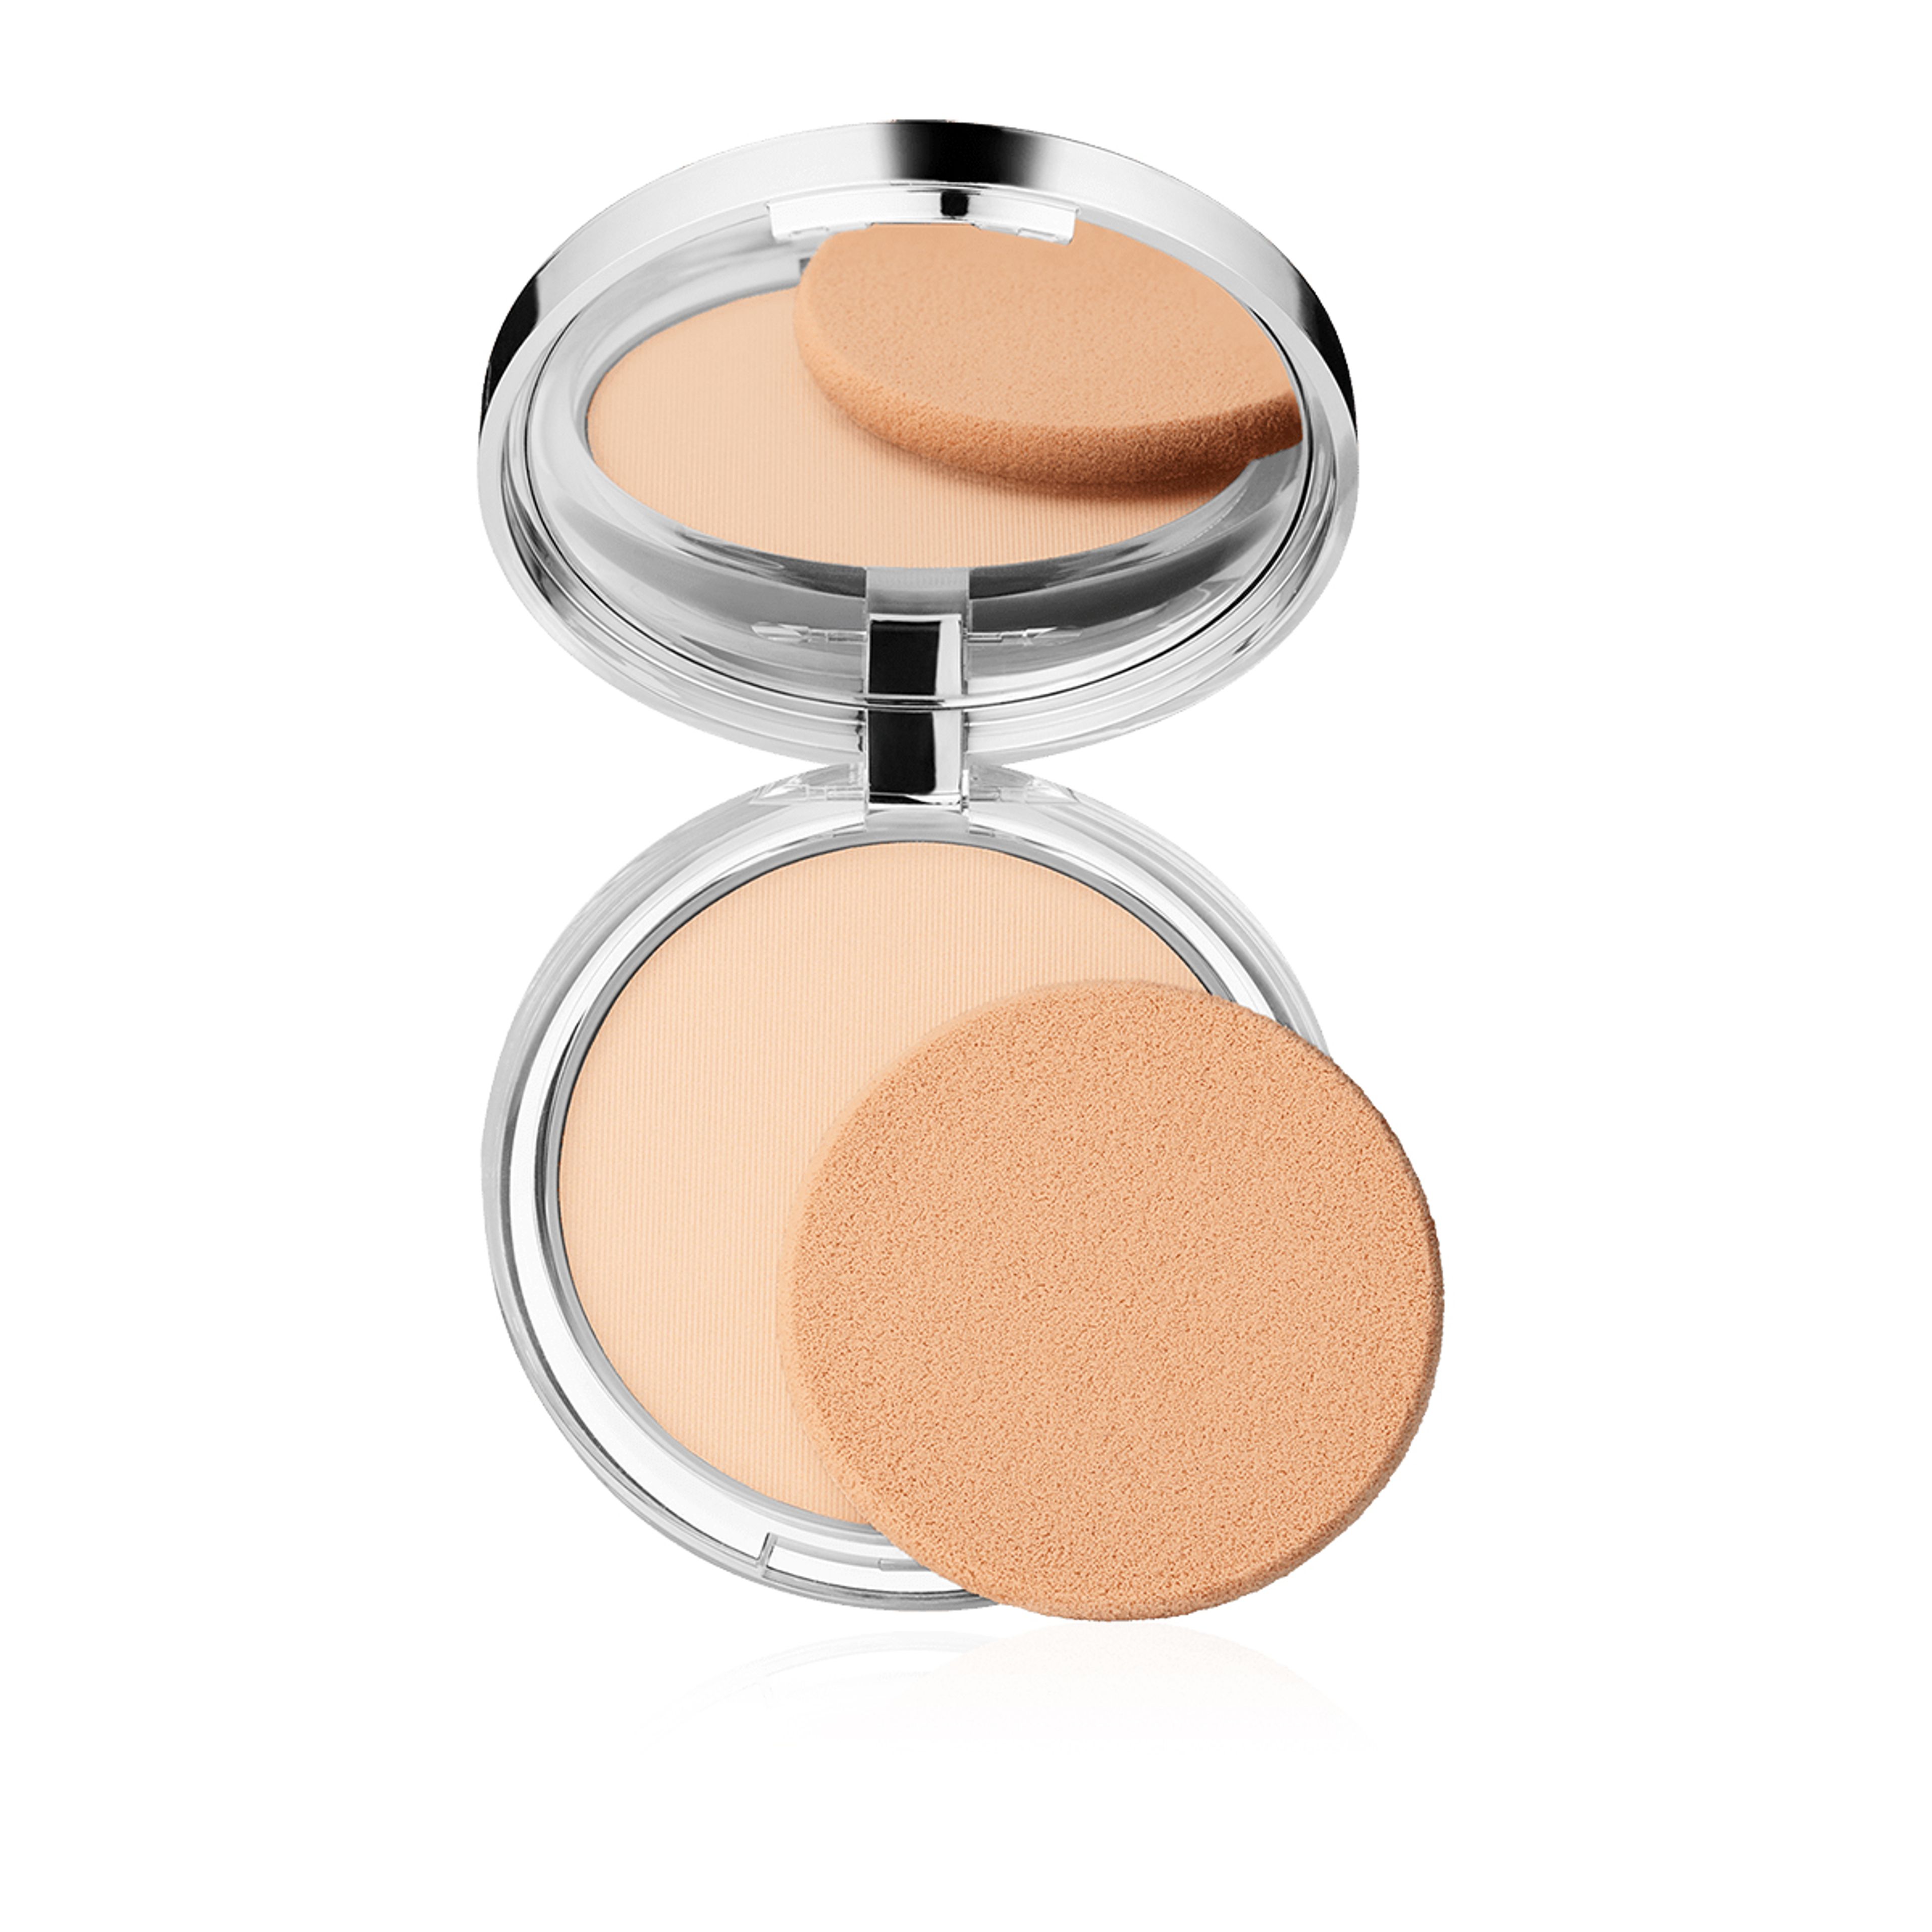 Clinique Stay Matte Sheer Pressed Powder 1